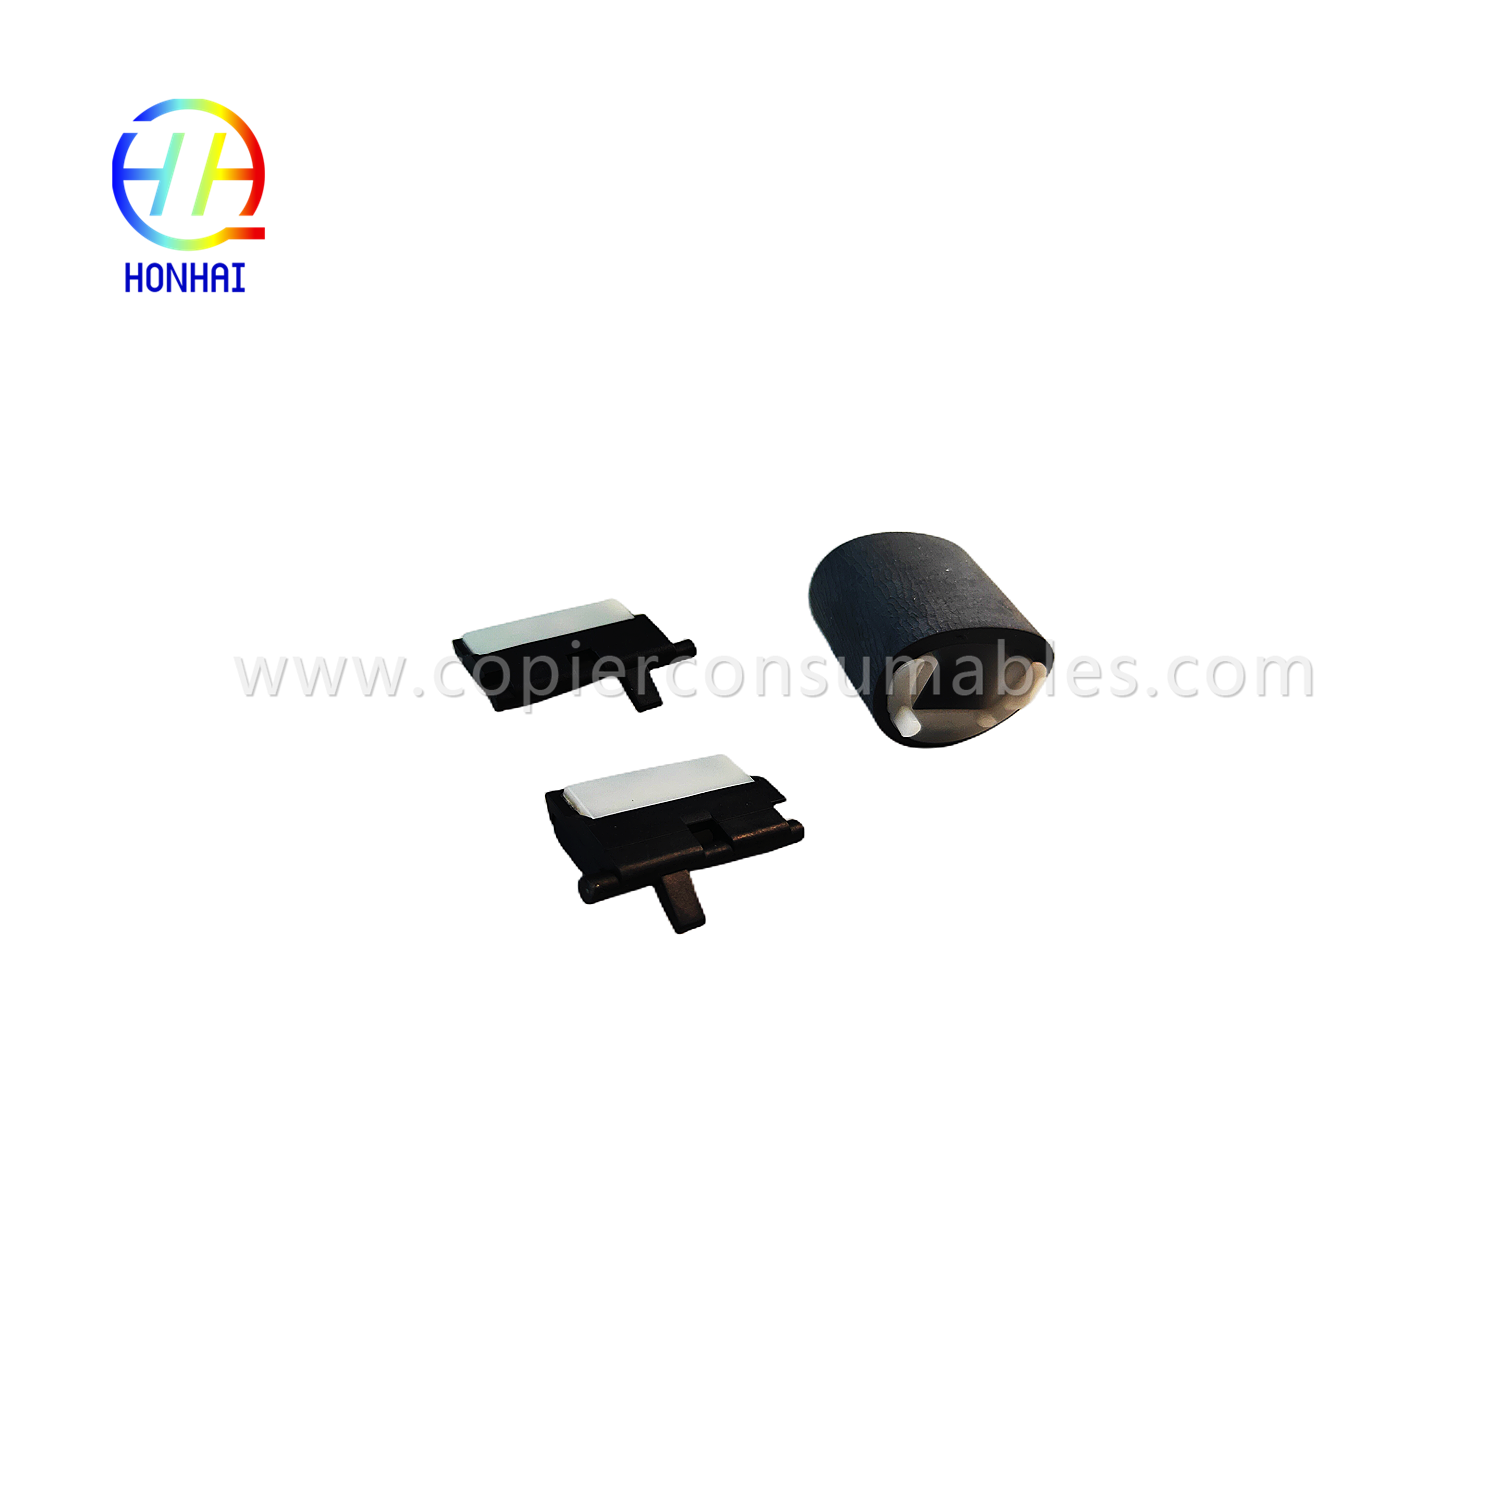 https://www.copierconsumables.com/paper-pickup-roller-separates-pad%ef%bc%88set%ef%bc%89for-hp-pagewide-x585z-x451dn-x476dn-x551dw-x576dw-556dn-586- 452dn-477dn-552-577z-cb780-60012-المنتج/